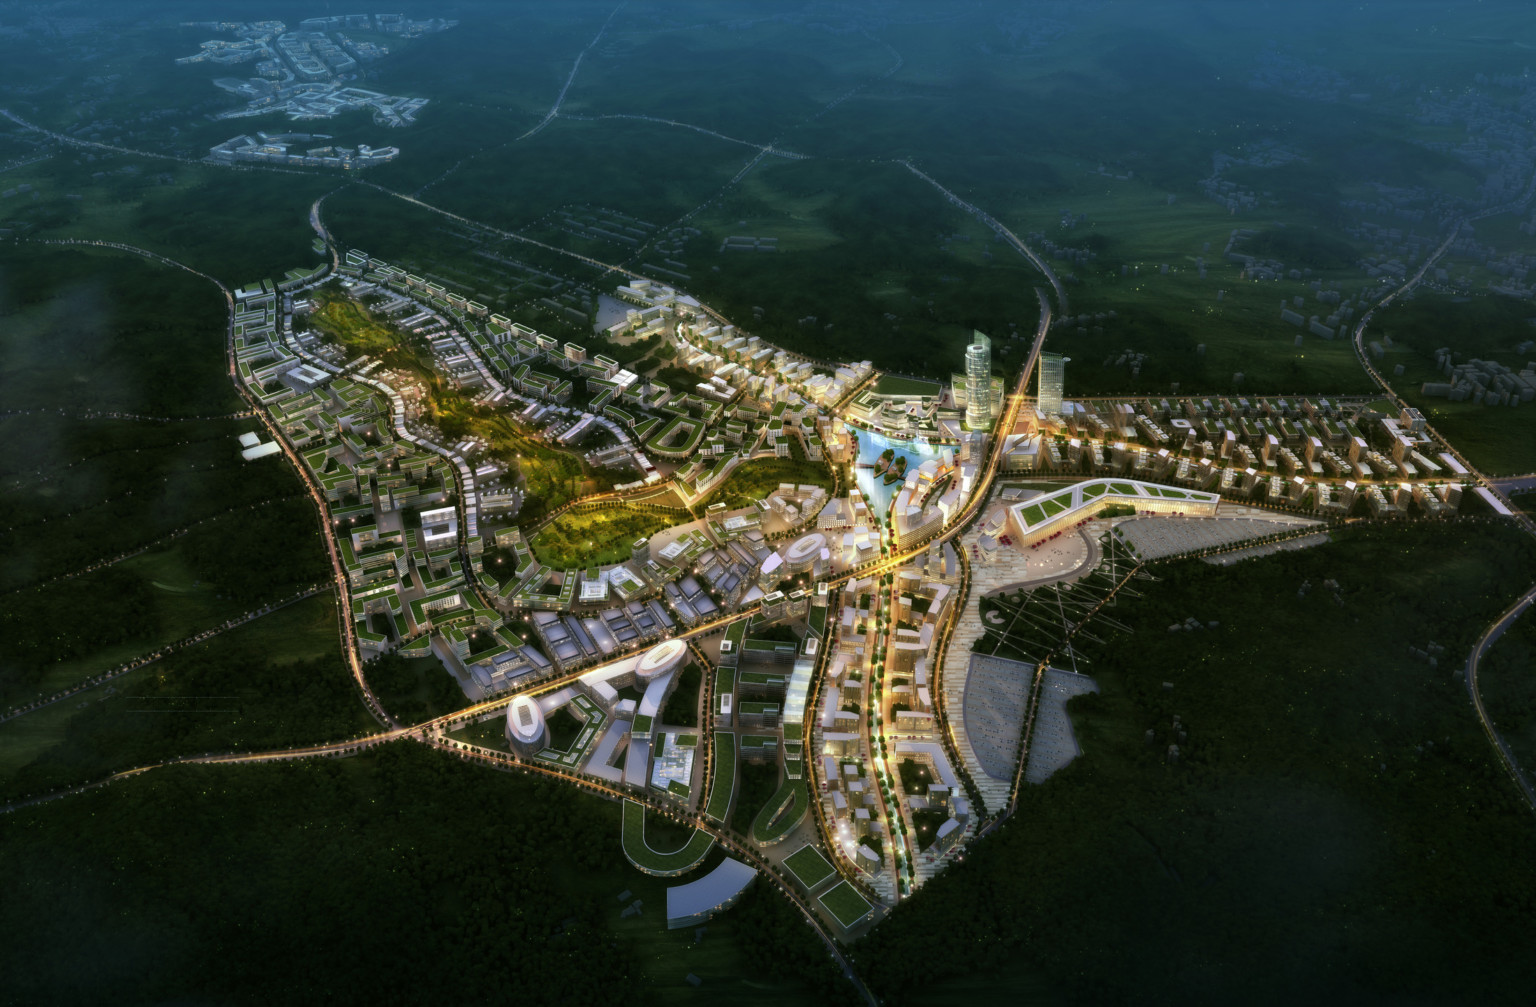 Smart City Korea illuminated at night with green roof buildings and a large park curving towards lake